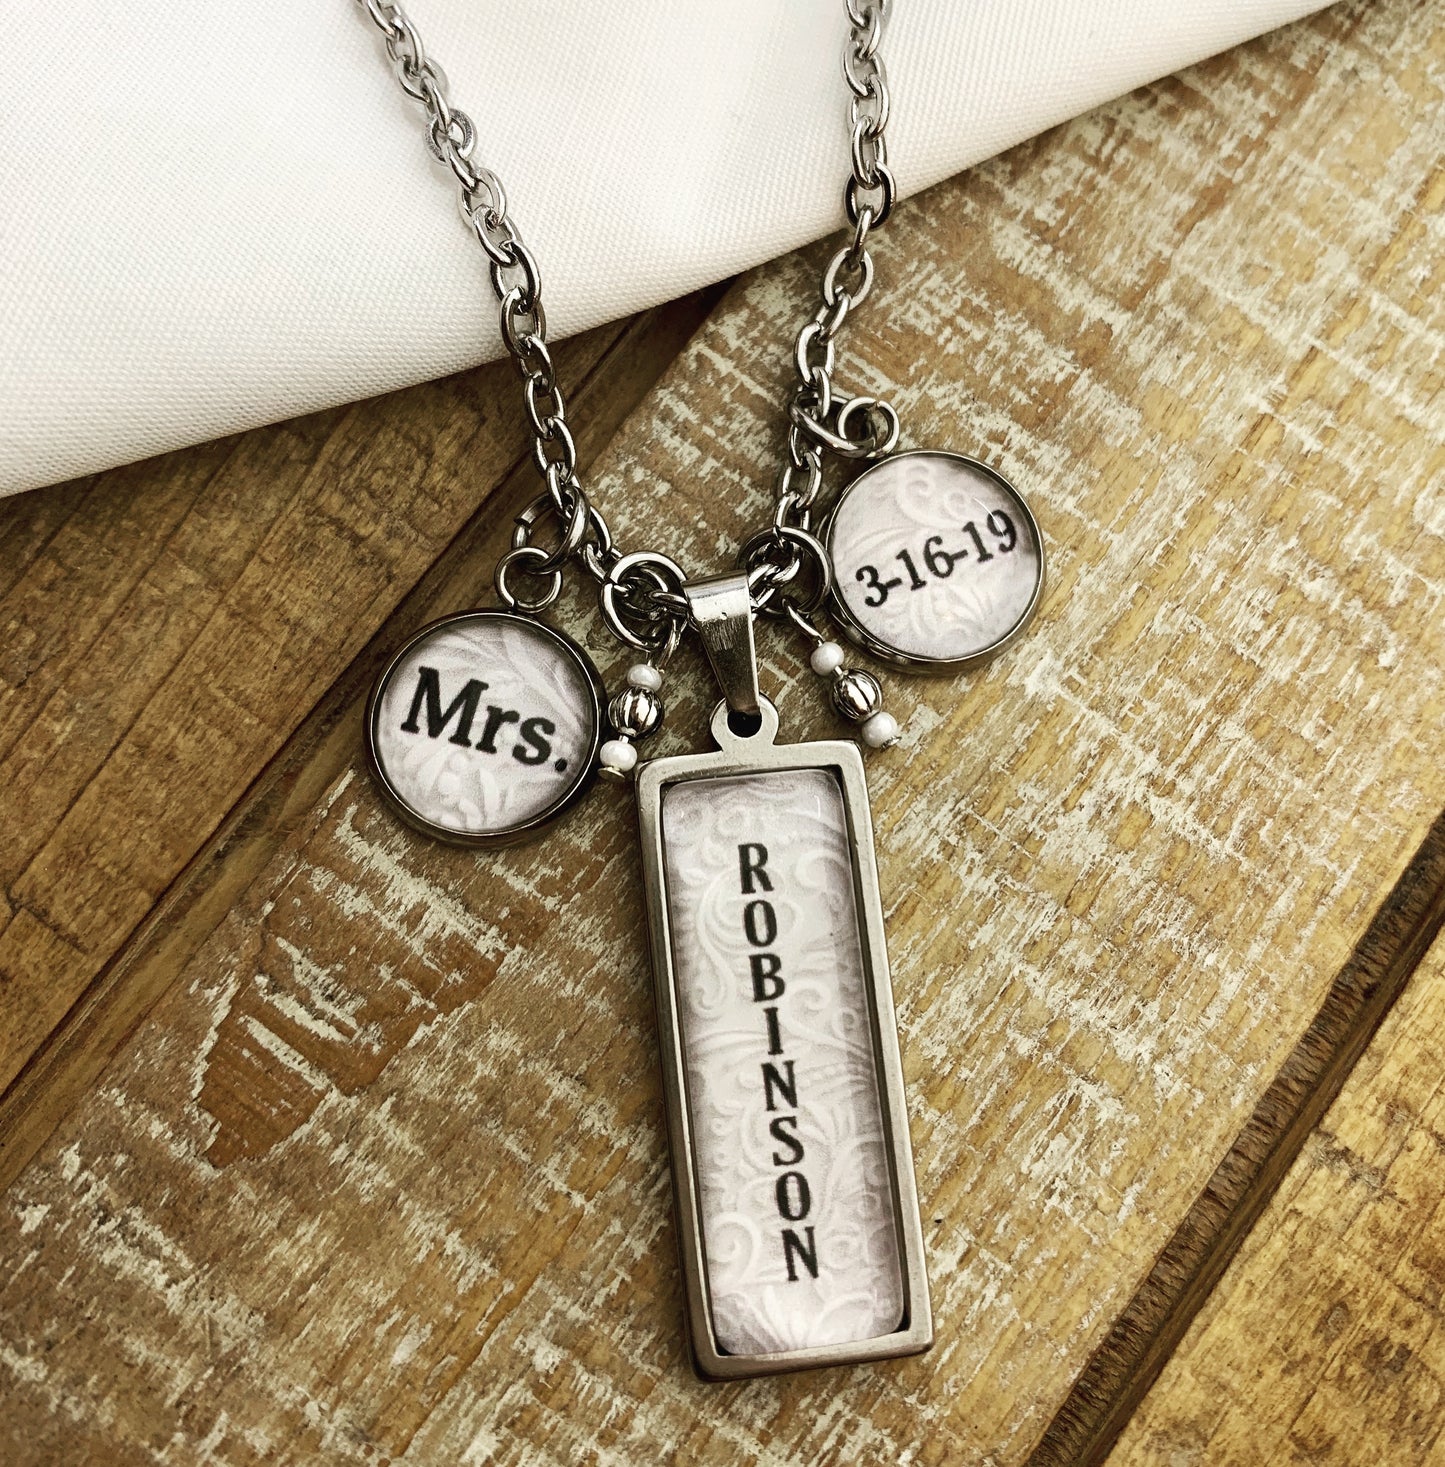 Customized Bride Necklace (Mrs. and Date included)